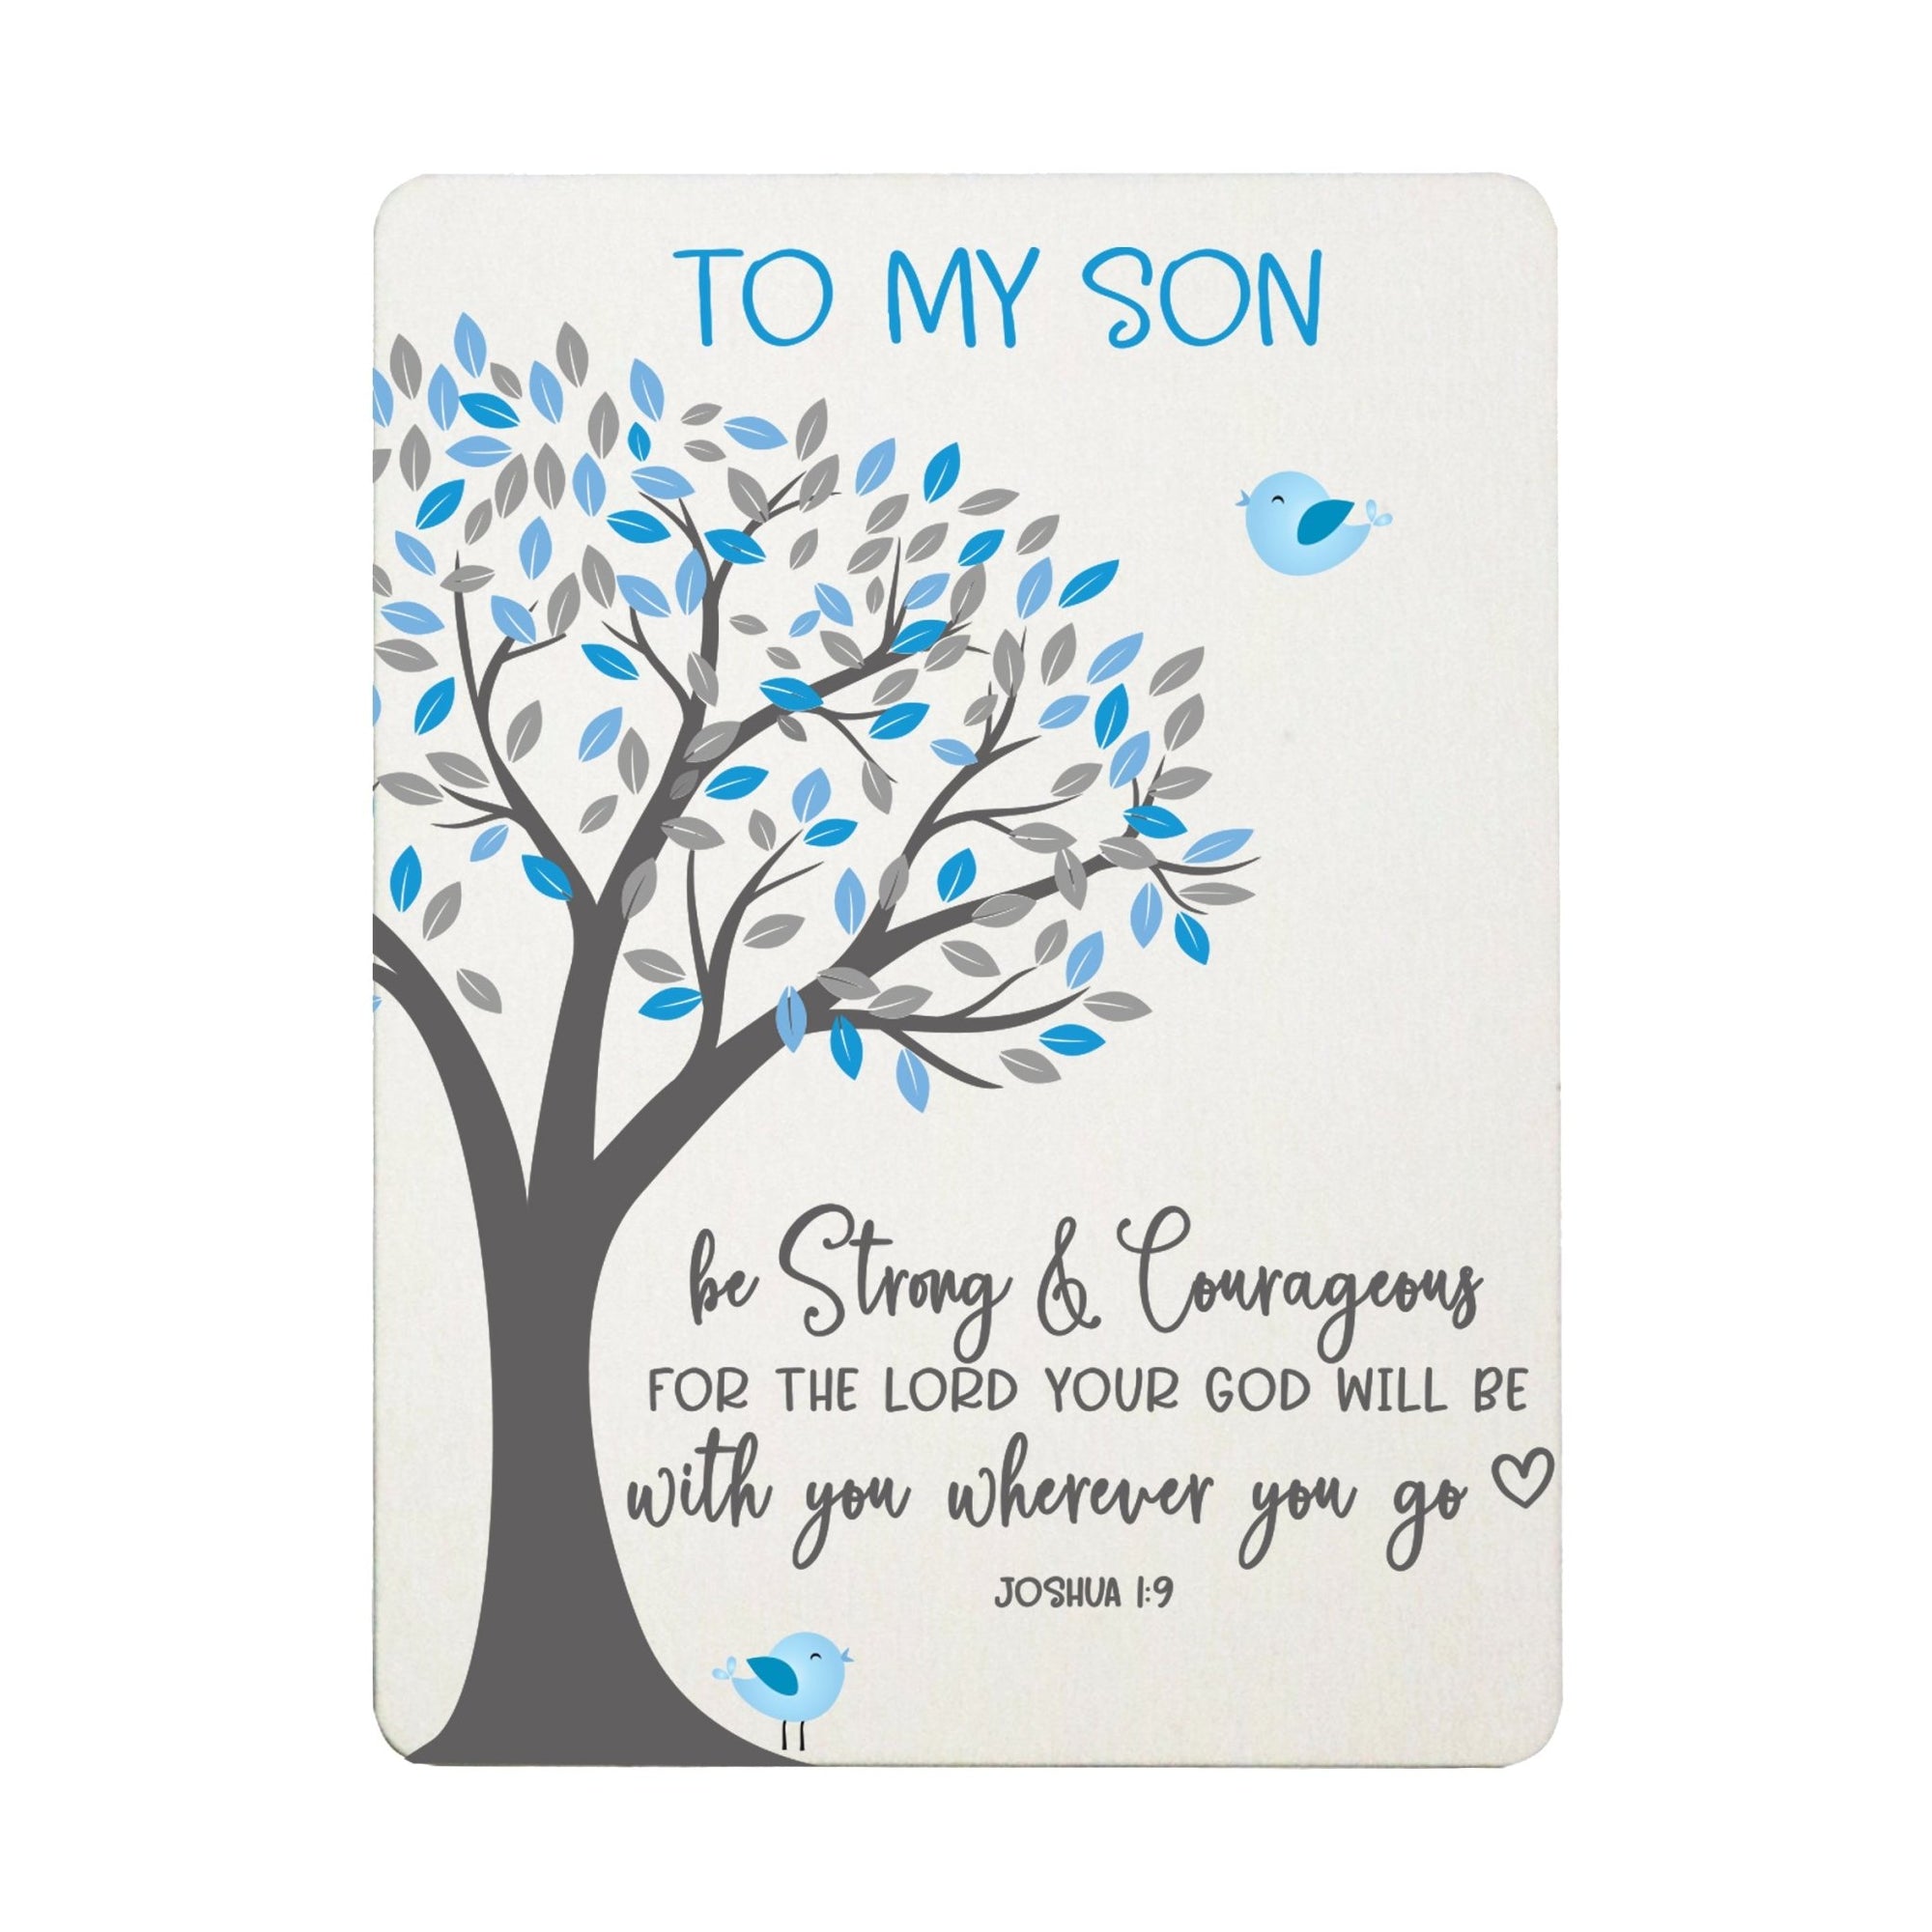 Newborn Baby Scripture Magnet for Fridge - Strong & Courageous - LifeSong Milestones